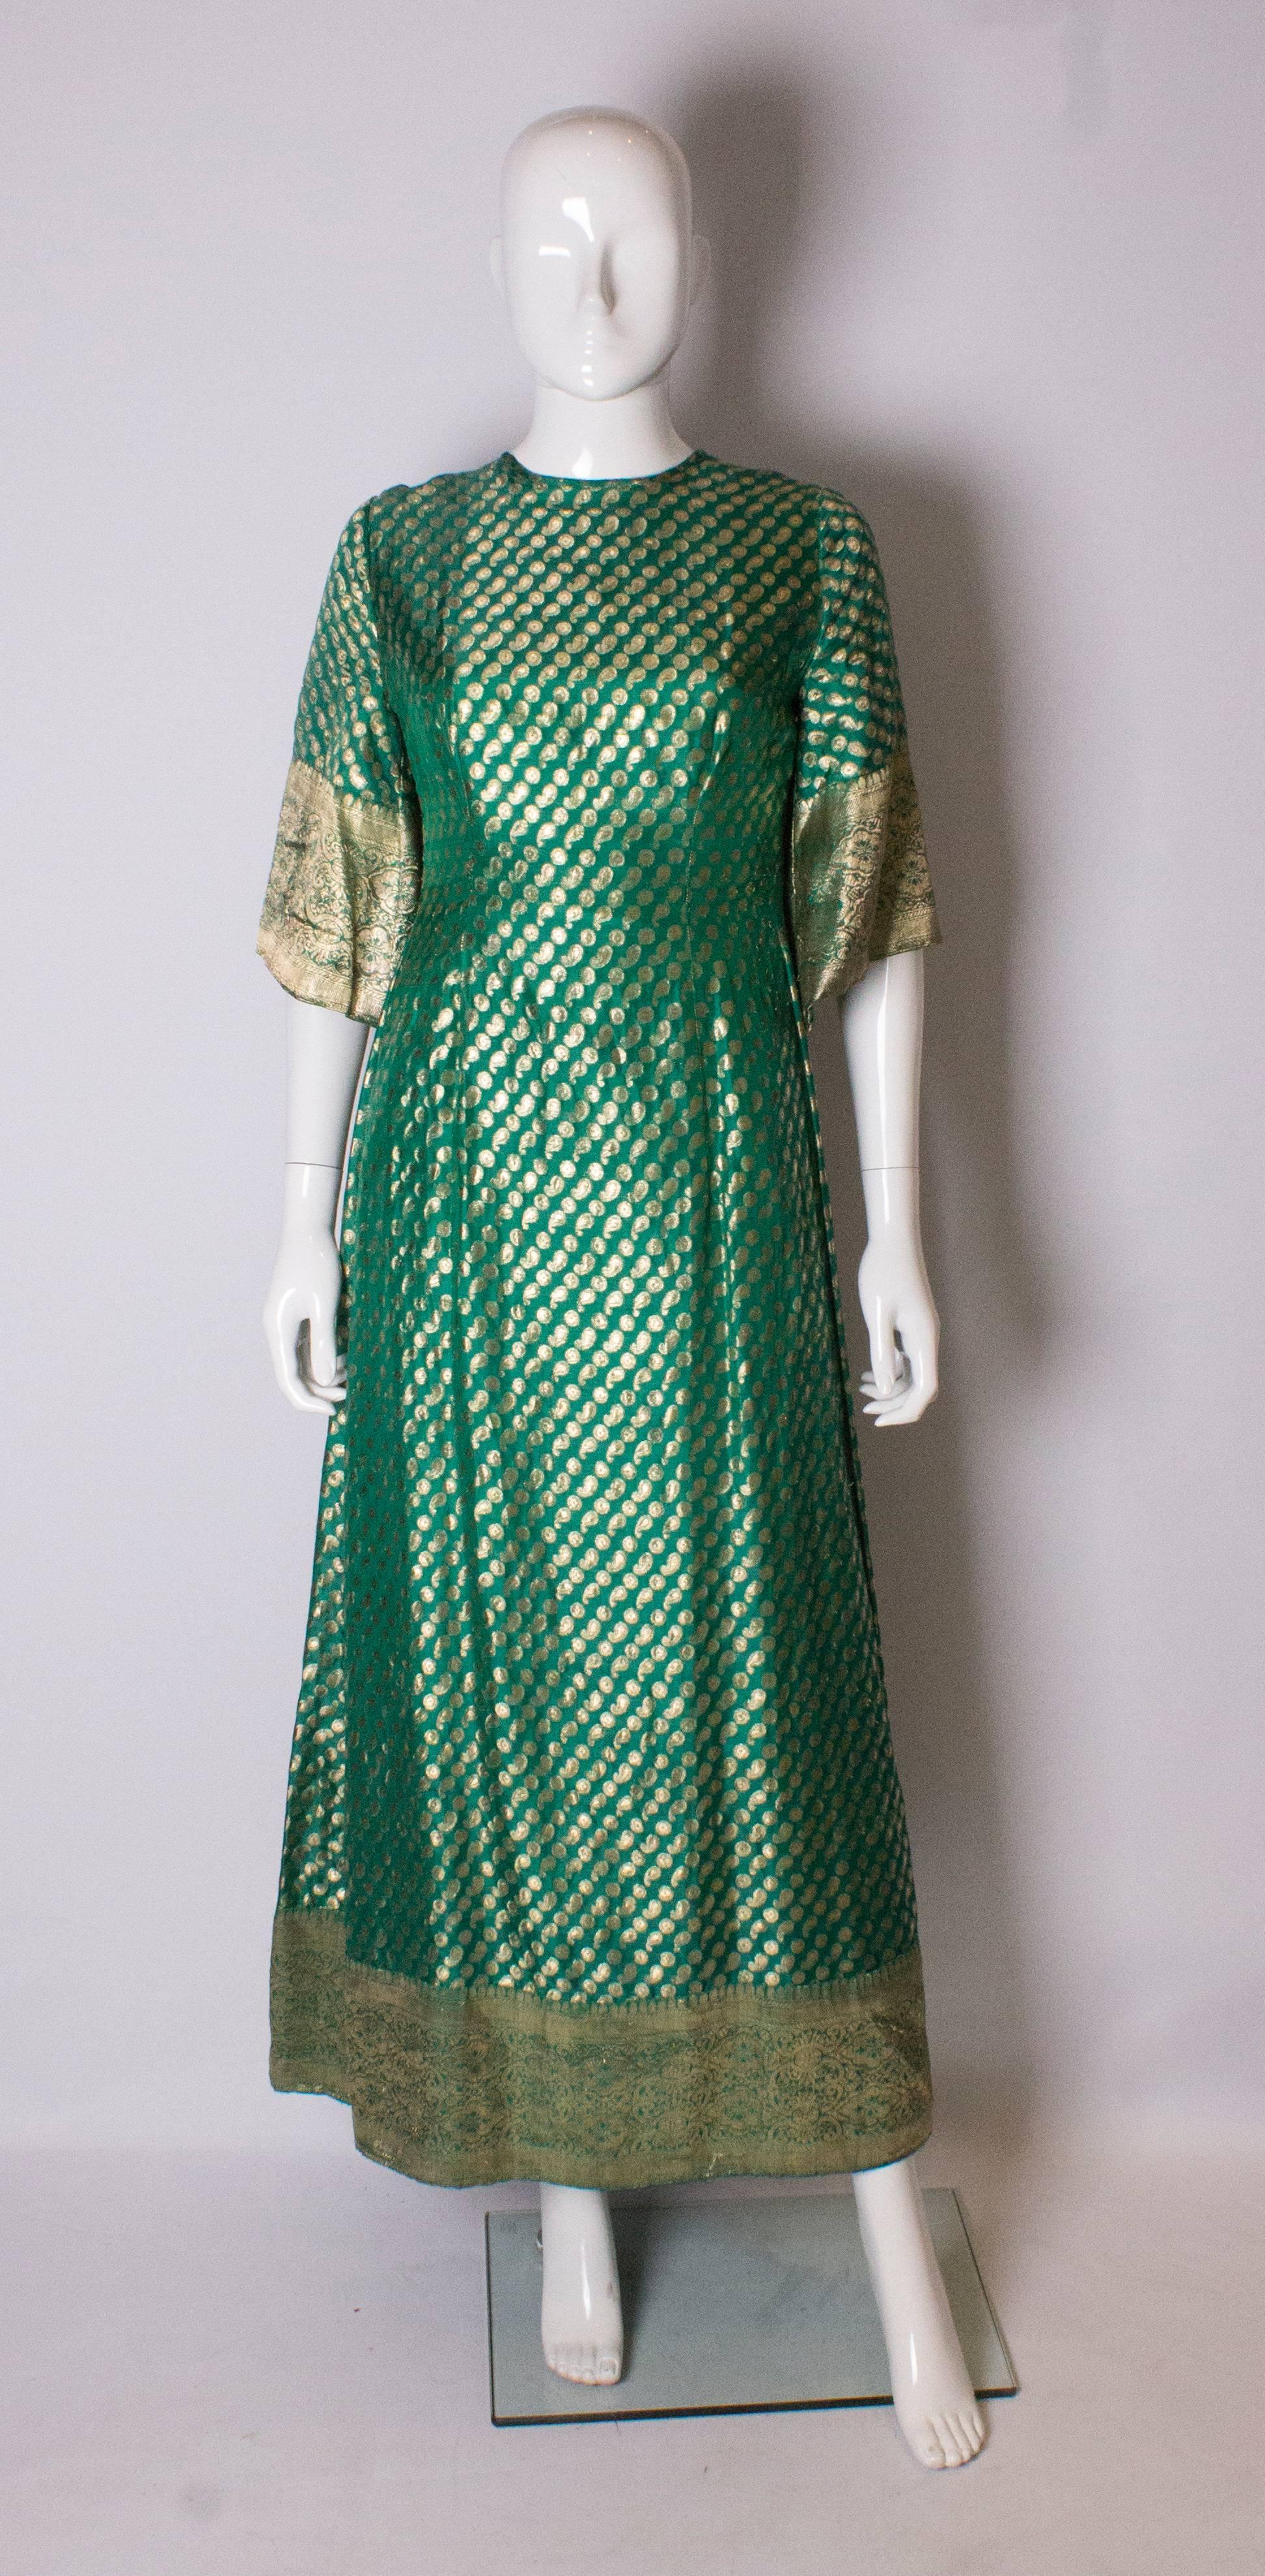 A stunning silk gown in green and gold. The dress has a round neckline at the front, and a v neckline at the back with gathering.  It has elbow length sleeves and wide gold detail at the hem.